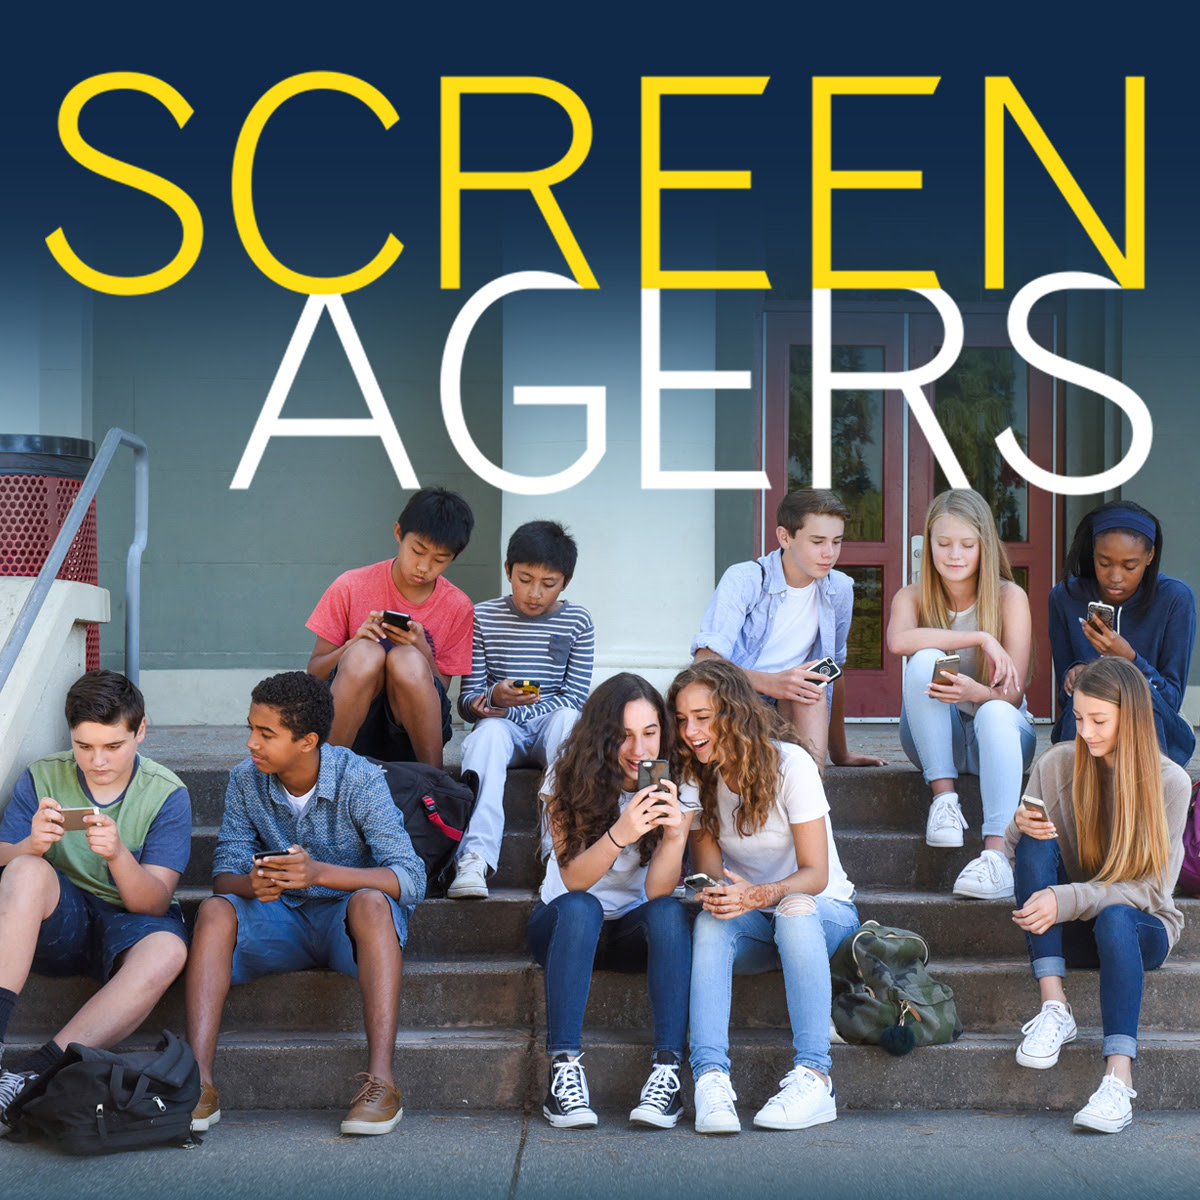 Screenagers Film Presented By Parkview Christian School